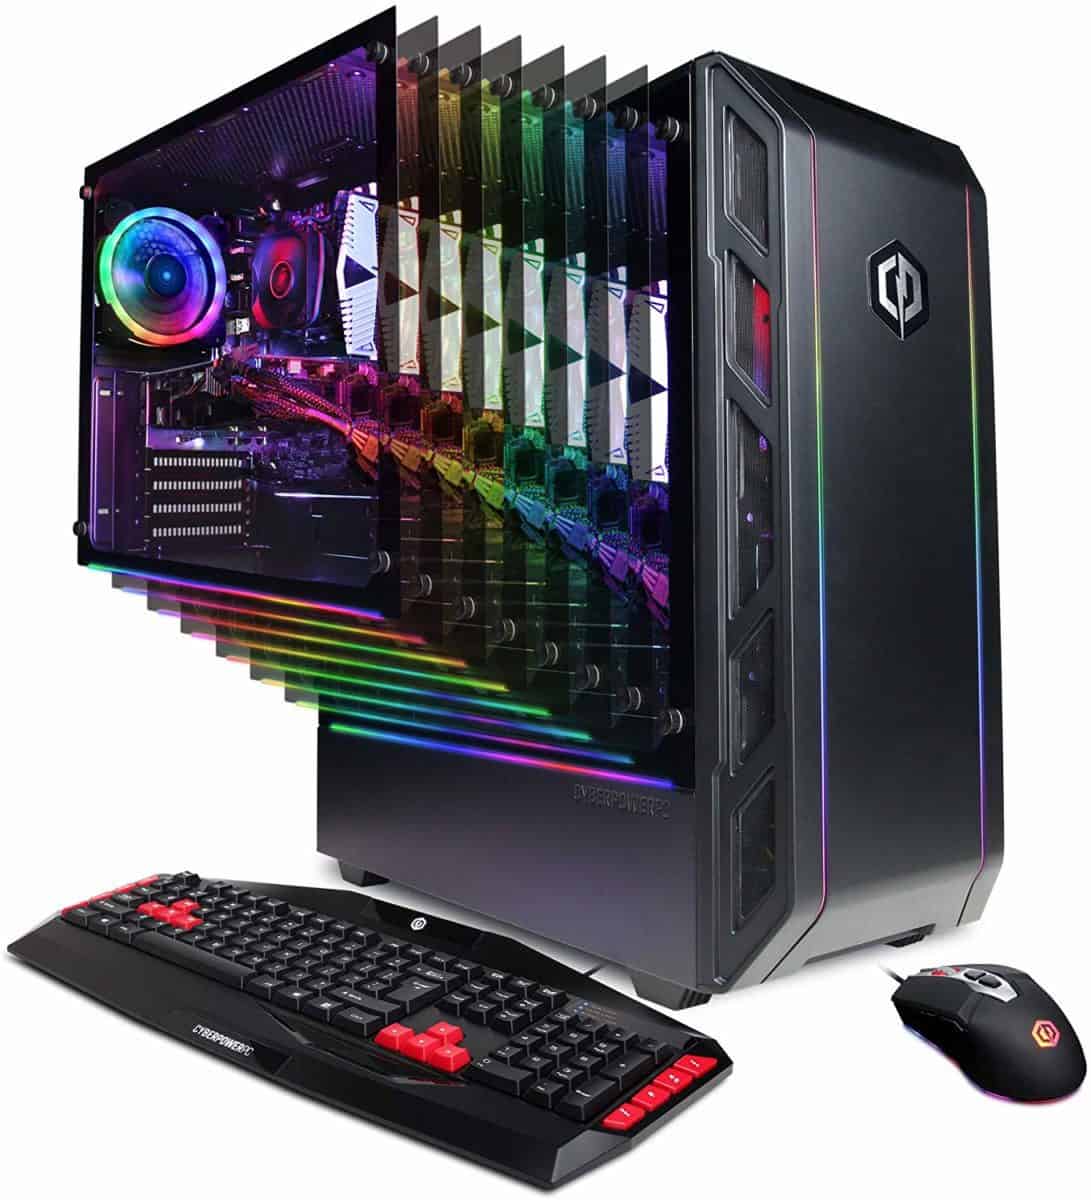 Curved Best Gaming Pc Build 2020 Under 800 for Small Room